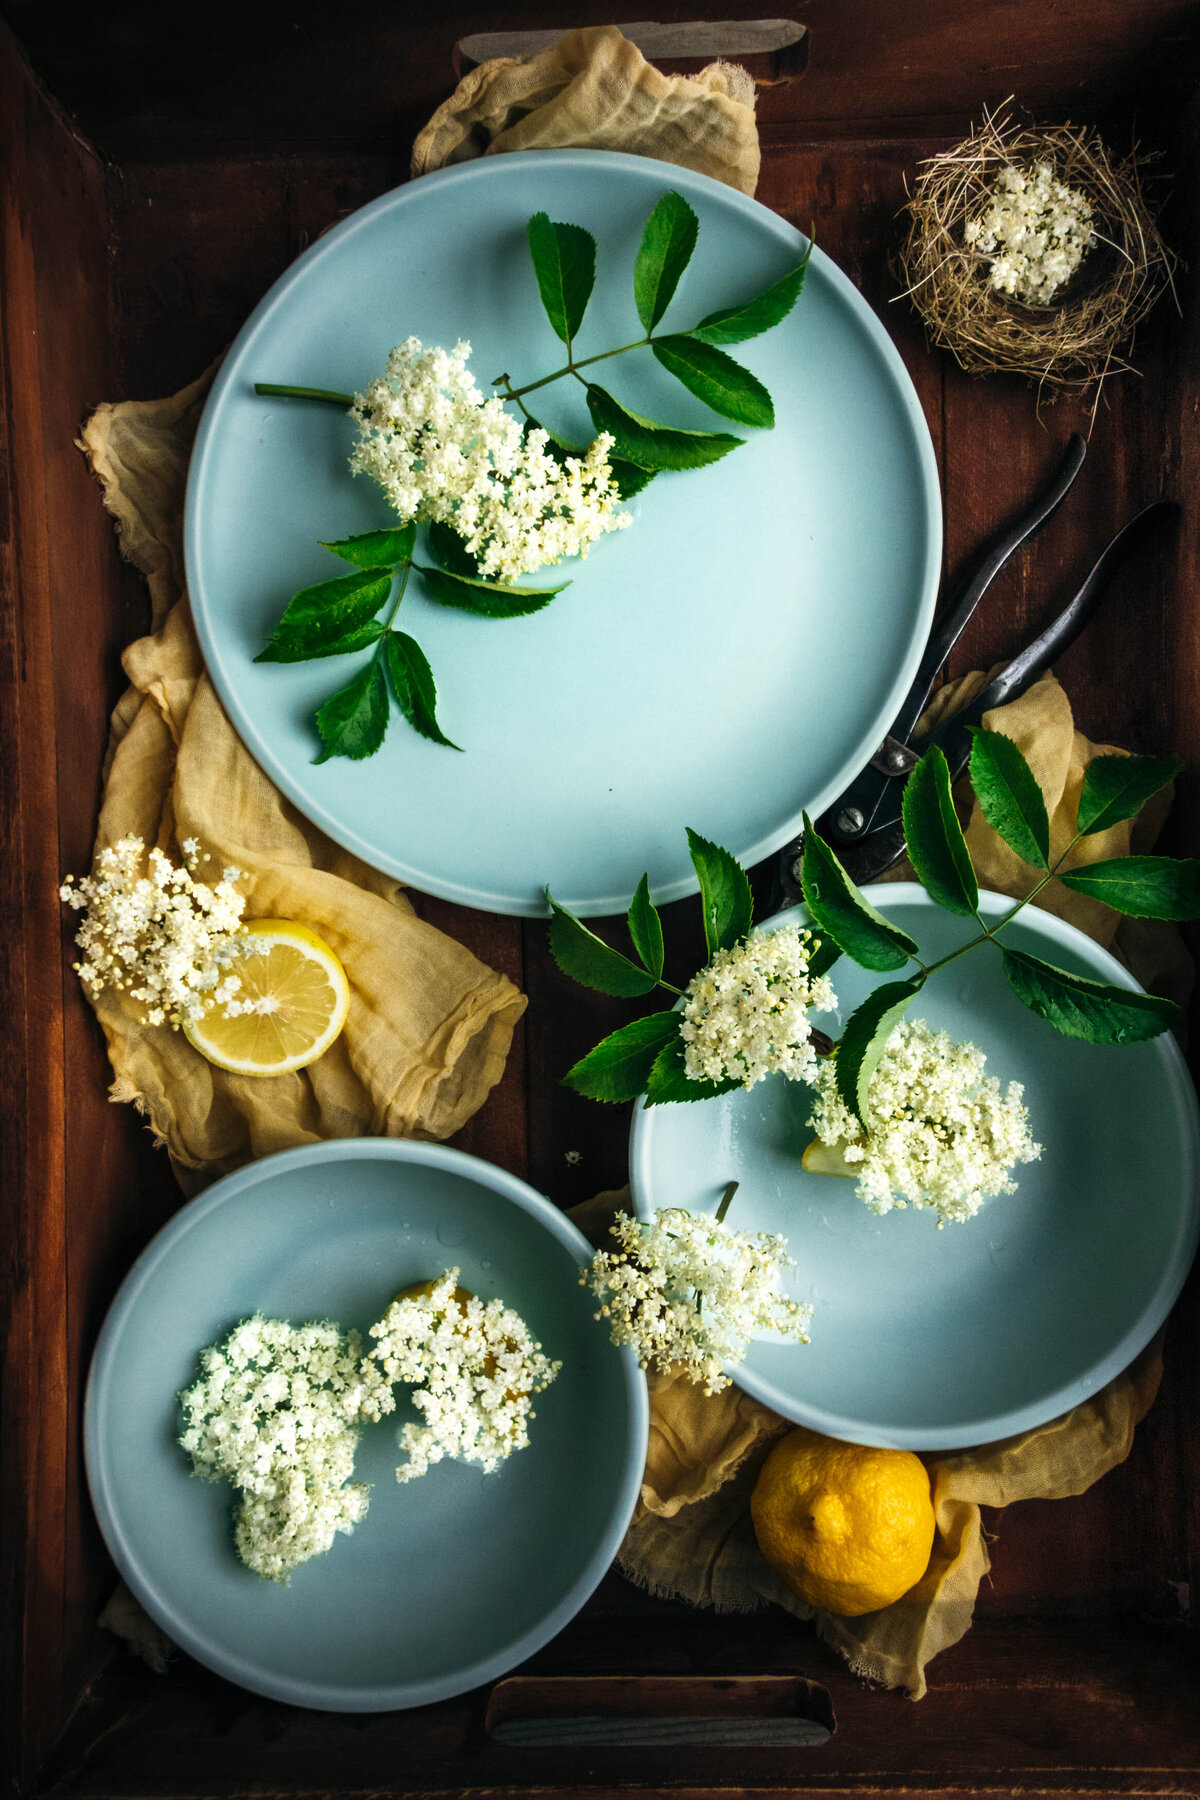 White elderflower blossoms on light blue shallow plate with lemons and yellow napkins in wooden crate